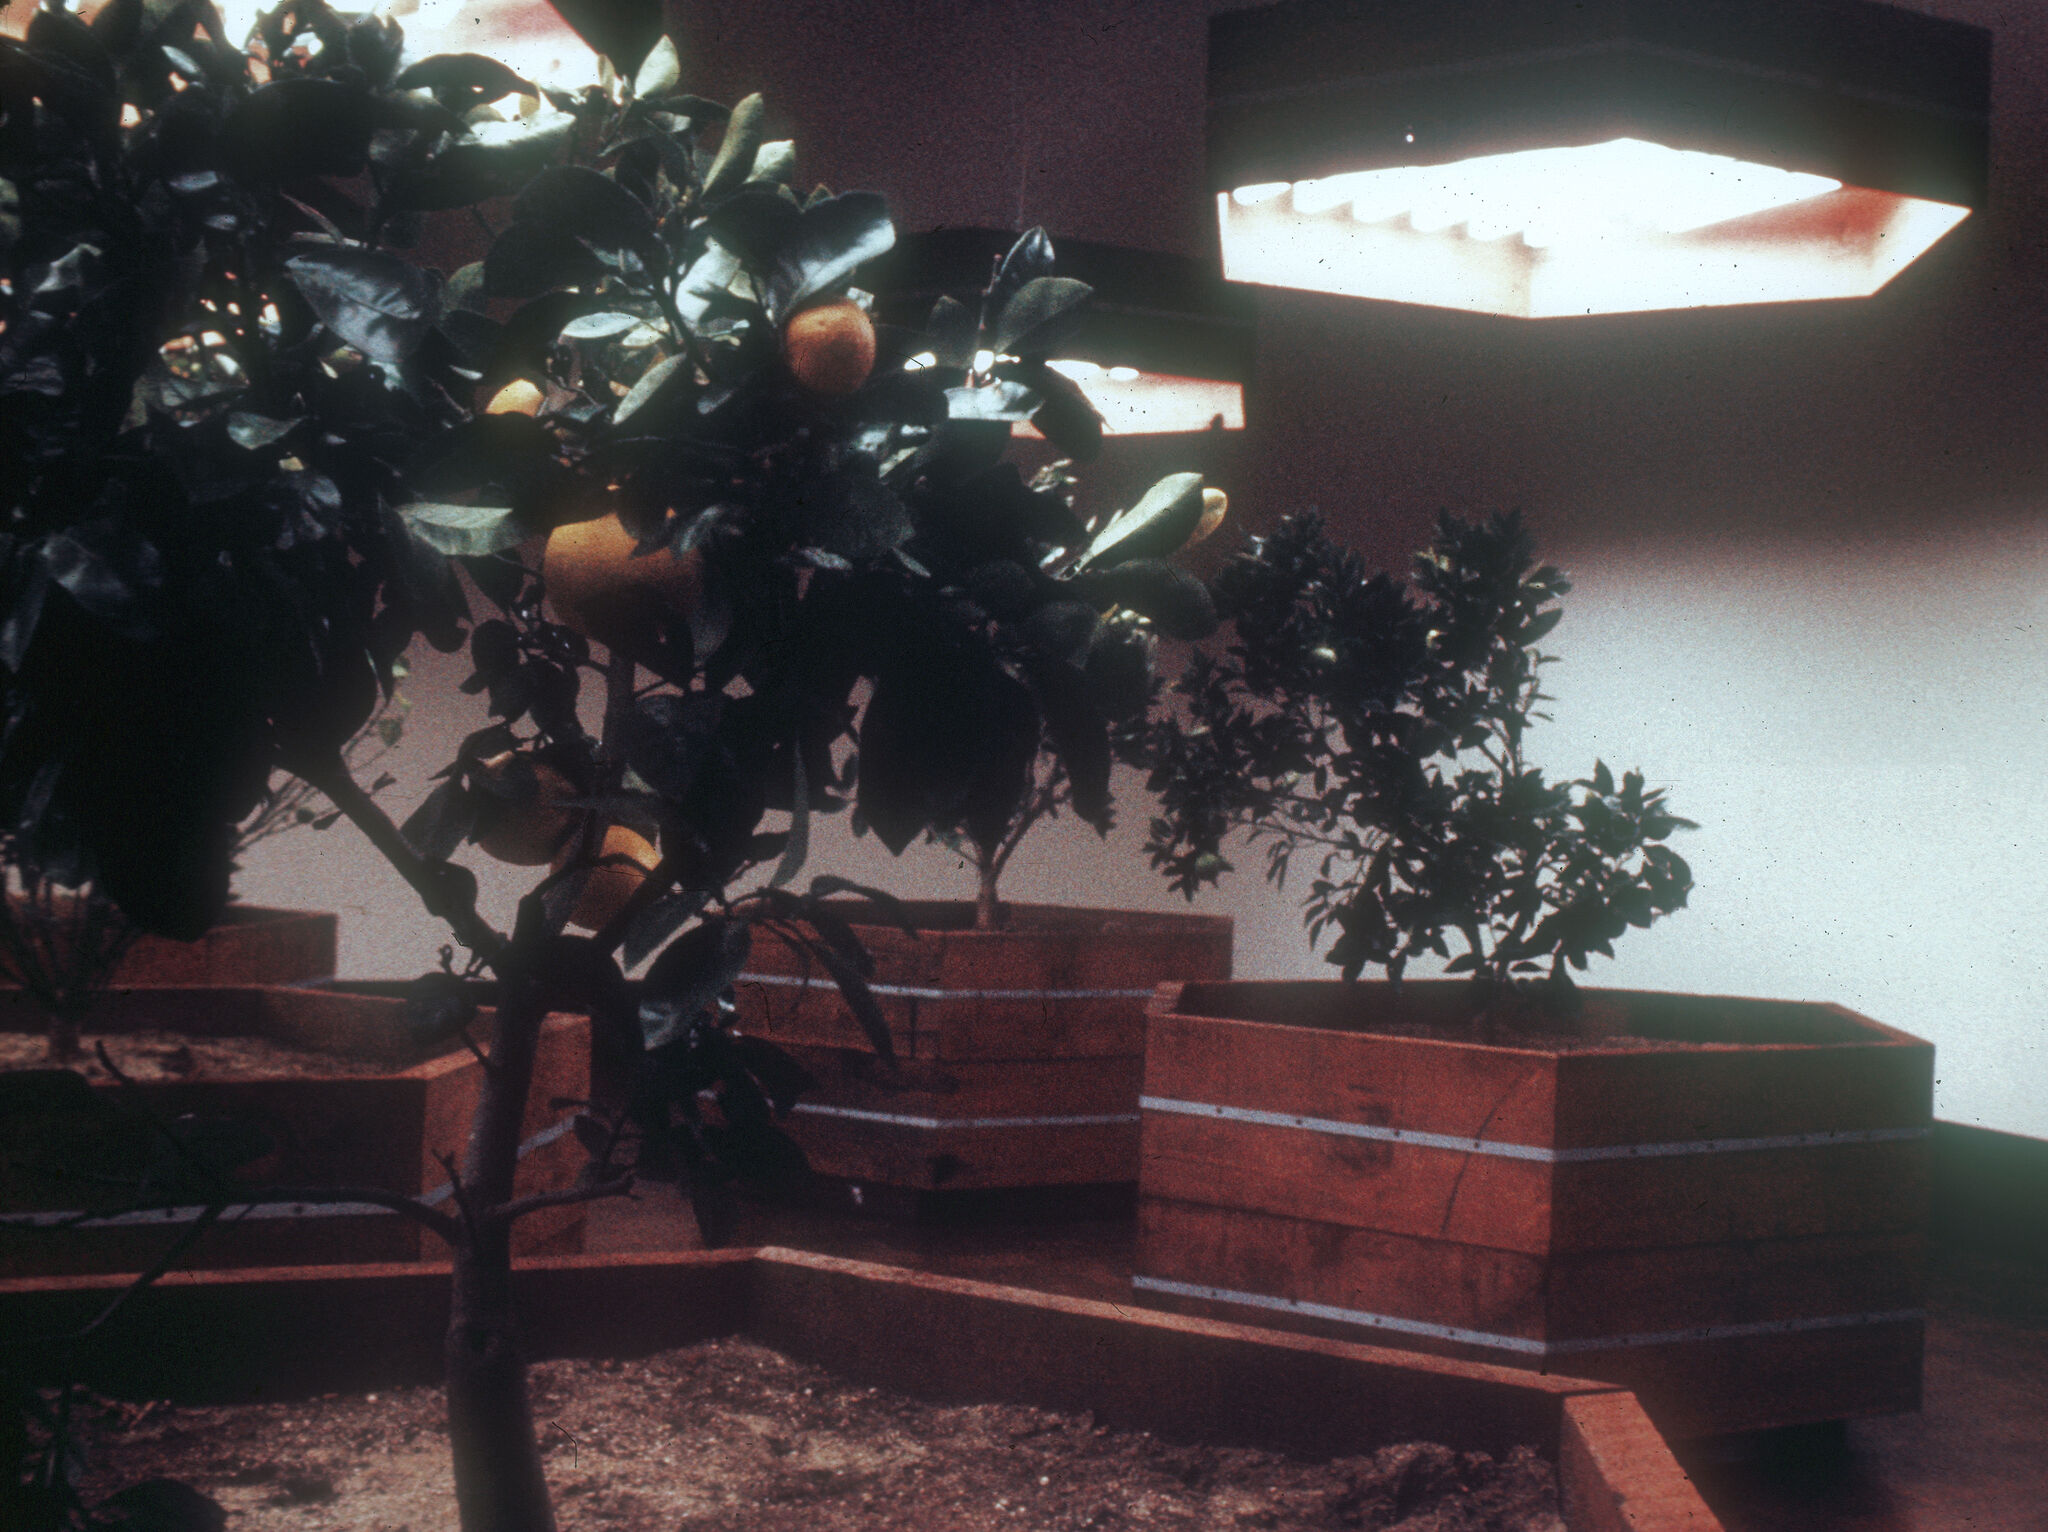 Citrus trees in wooden planters indoors with a geometric ceiling light fixture above.